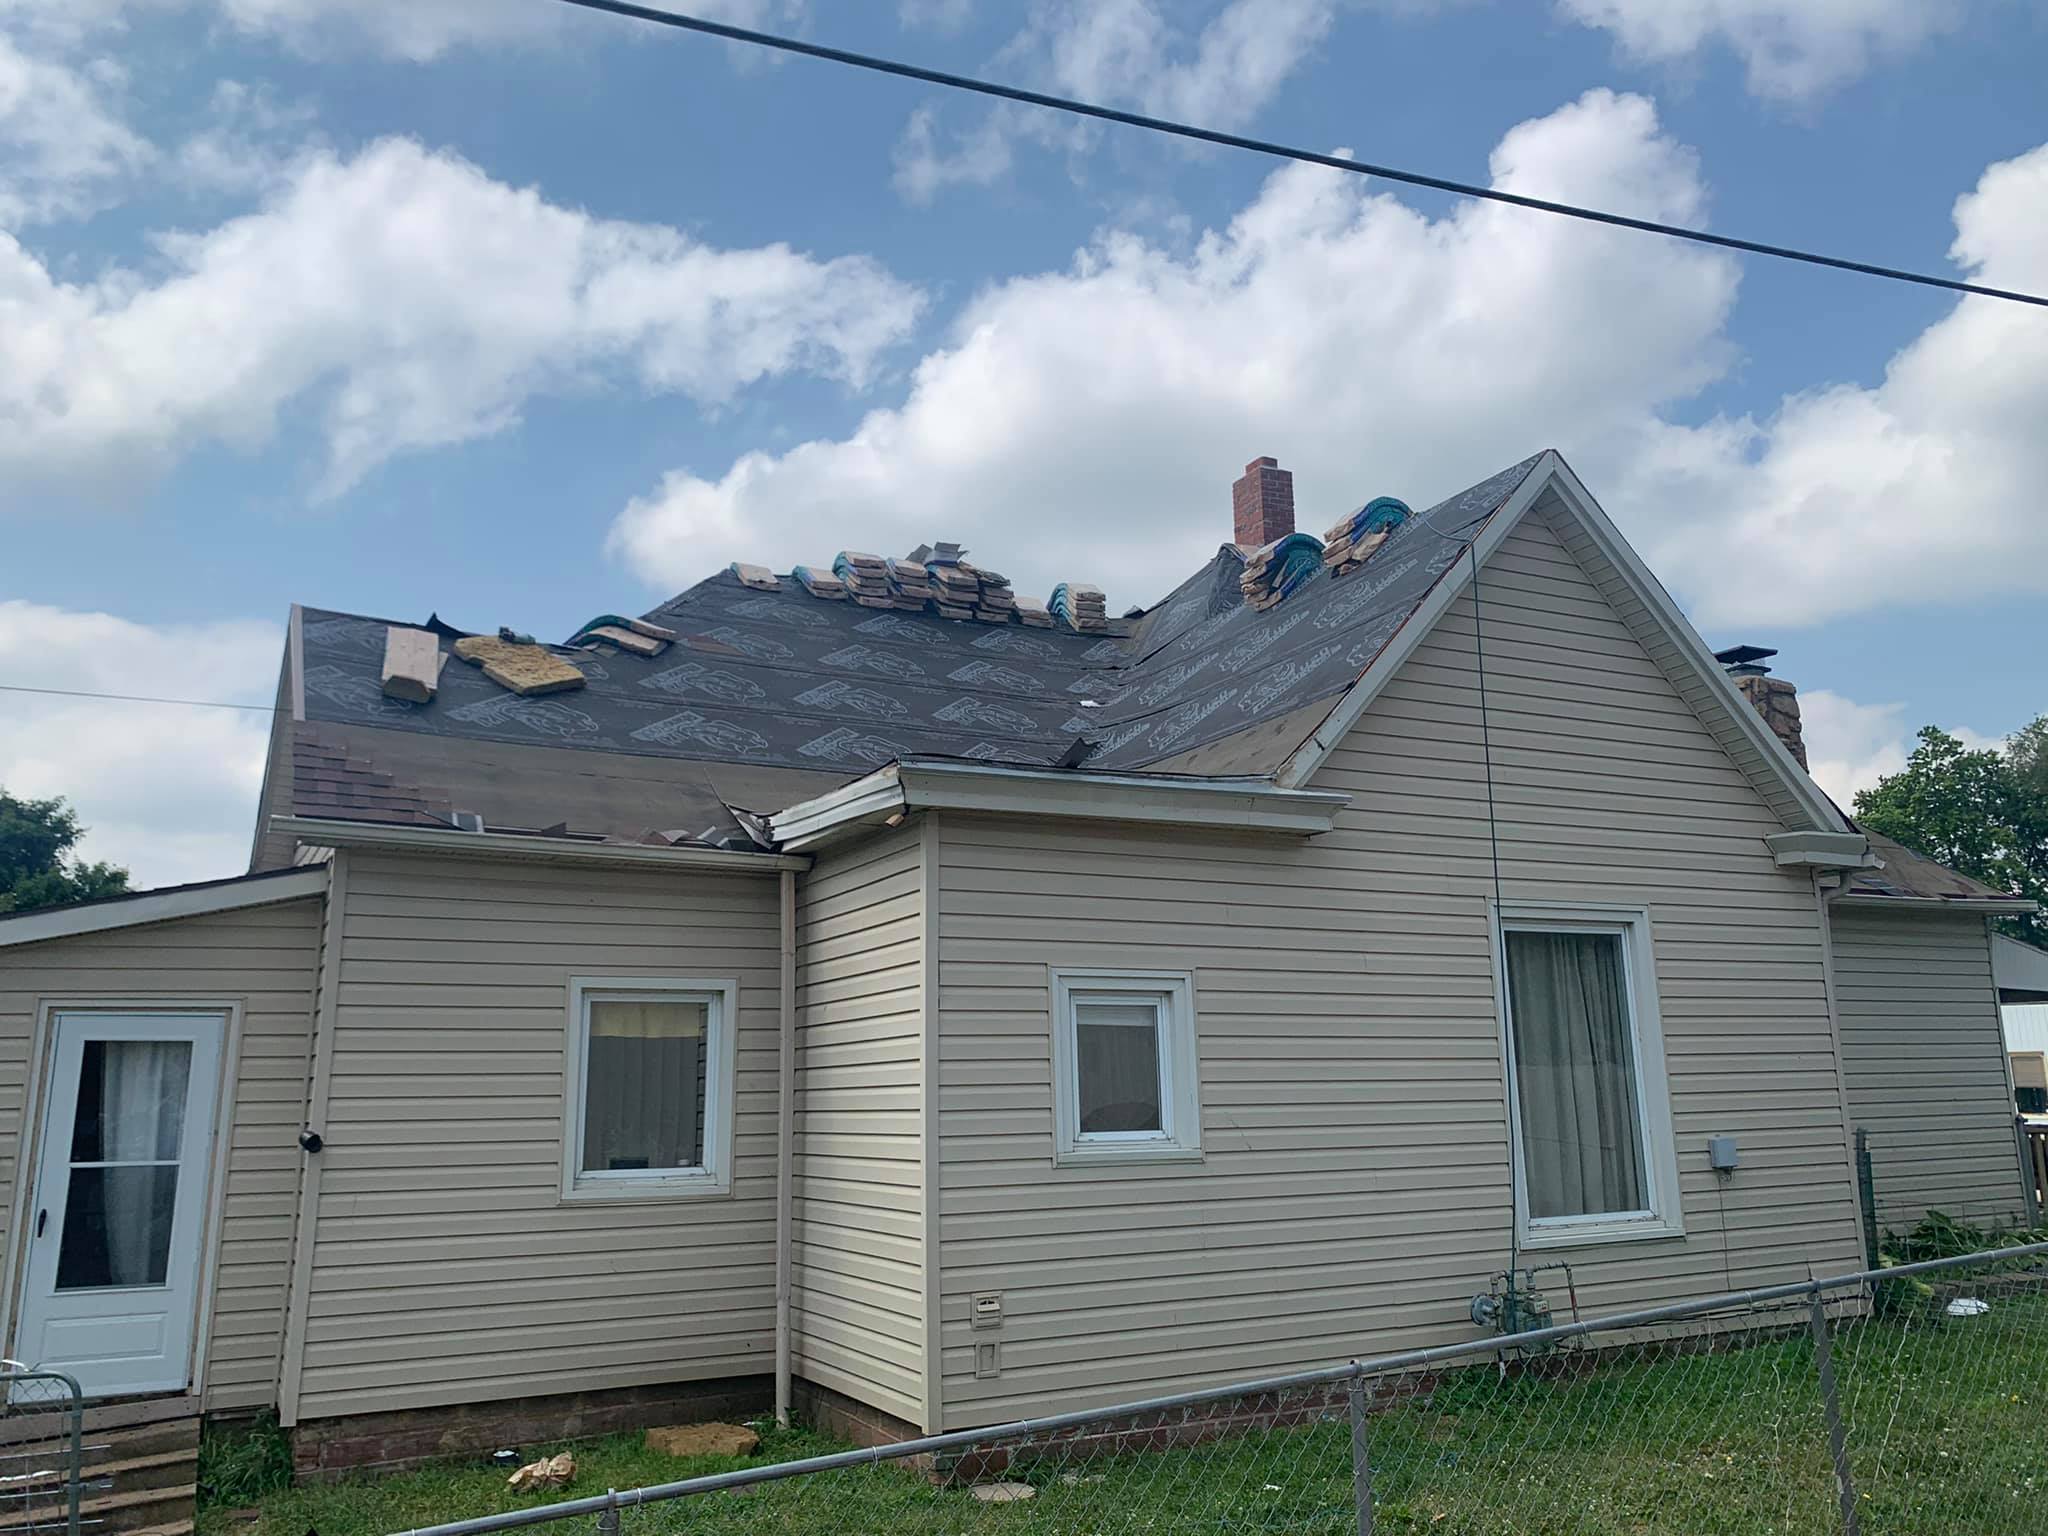 Roofing Companies Savannah Missouri - Tips For Hiring The Right One